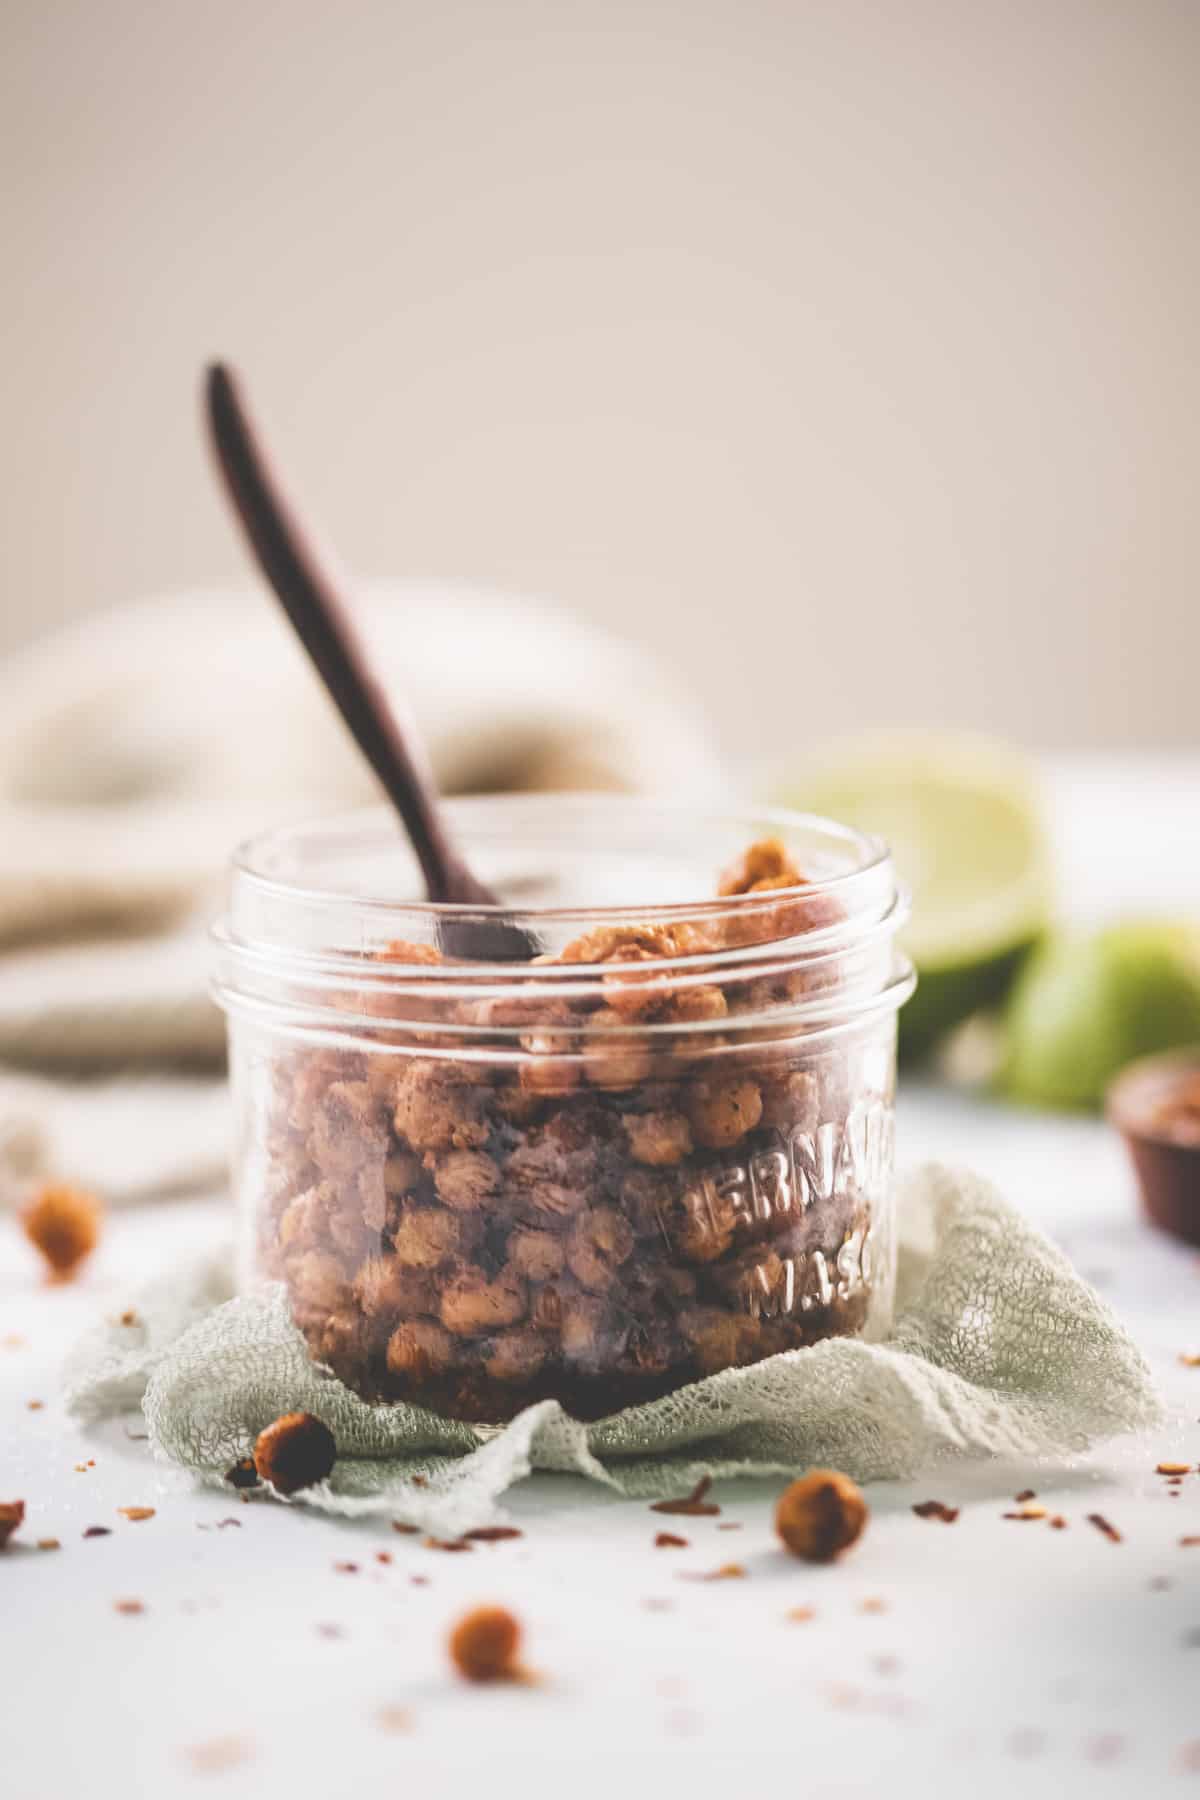 Chili Lime Chickpeas in a glass jar with a wooden serving spoon, surrounded by a bowl of chili flakes, fresh lime and spilt crumbs.